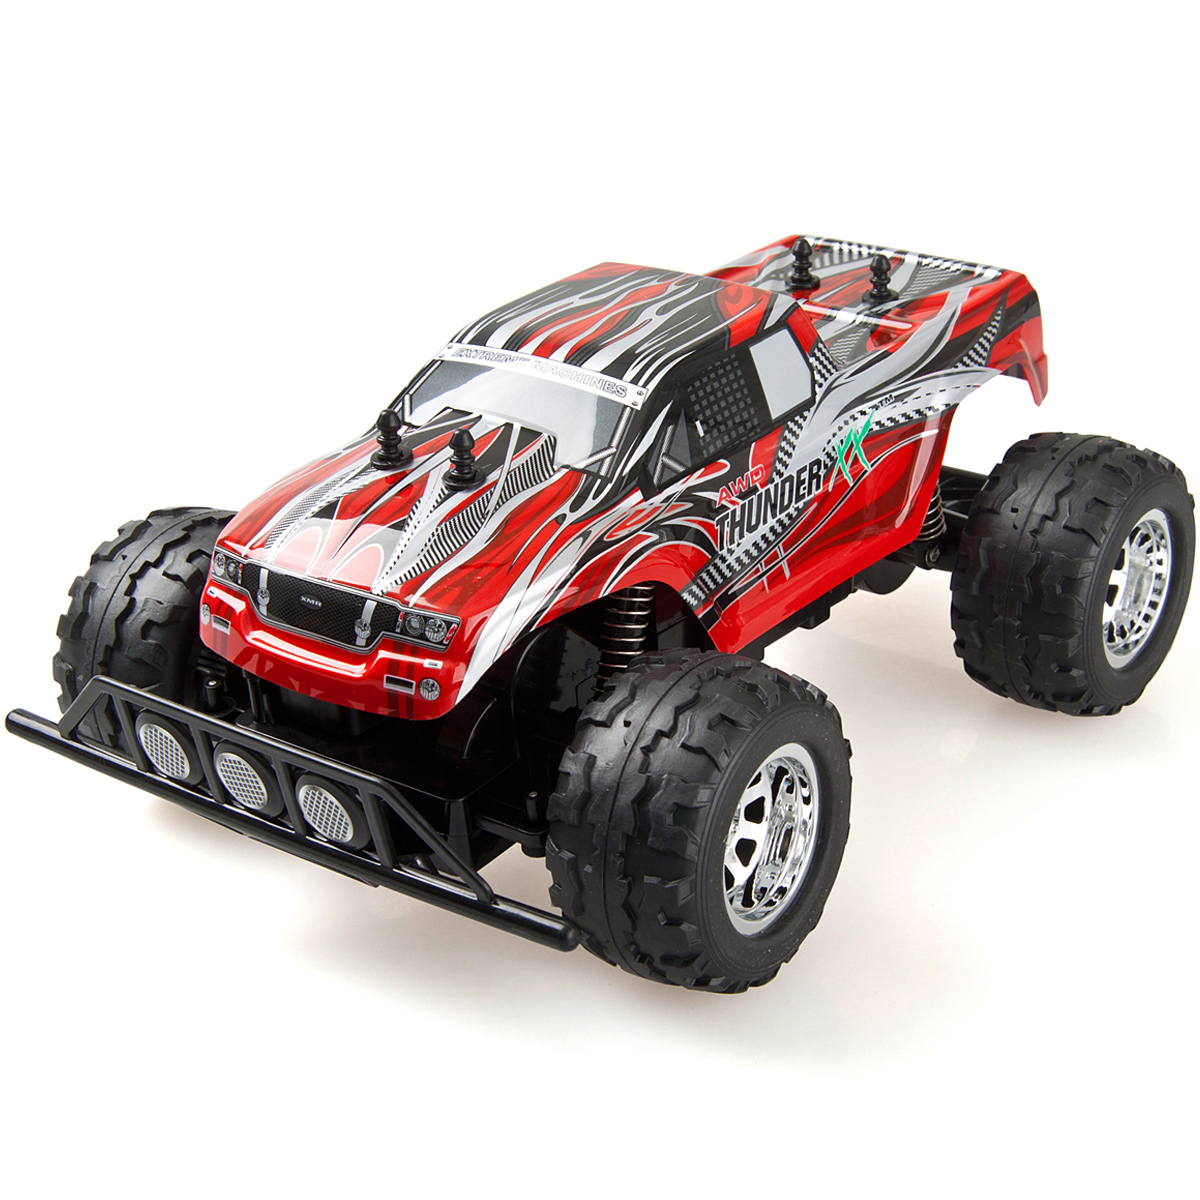 Toy Remote Control Cars